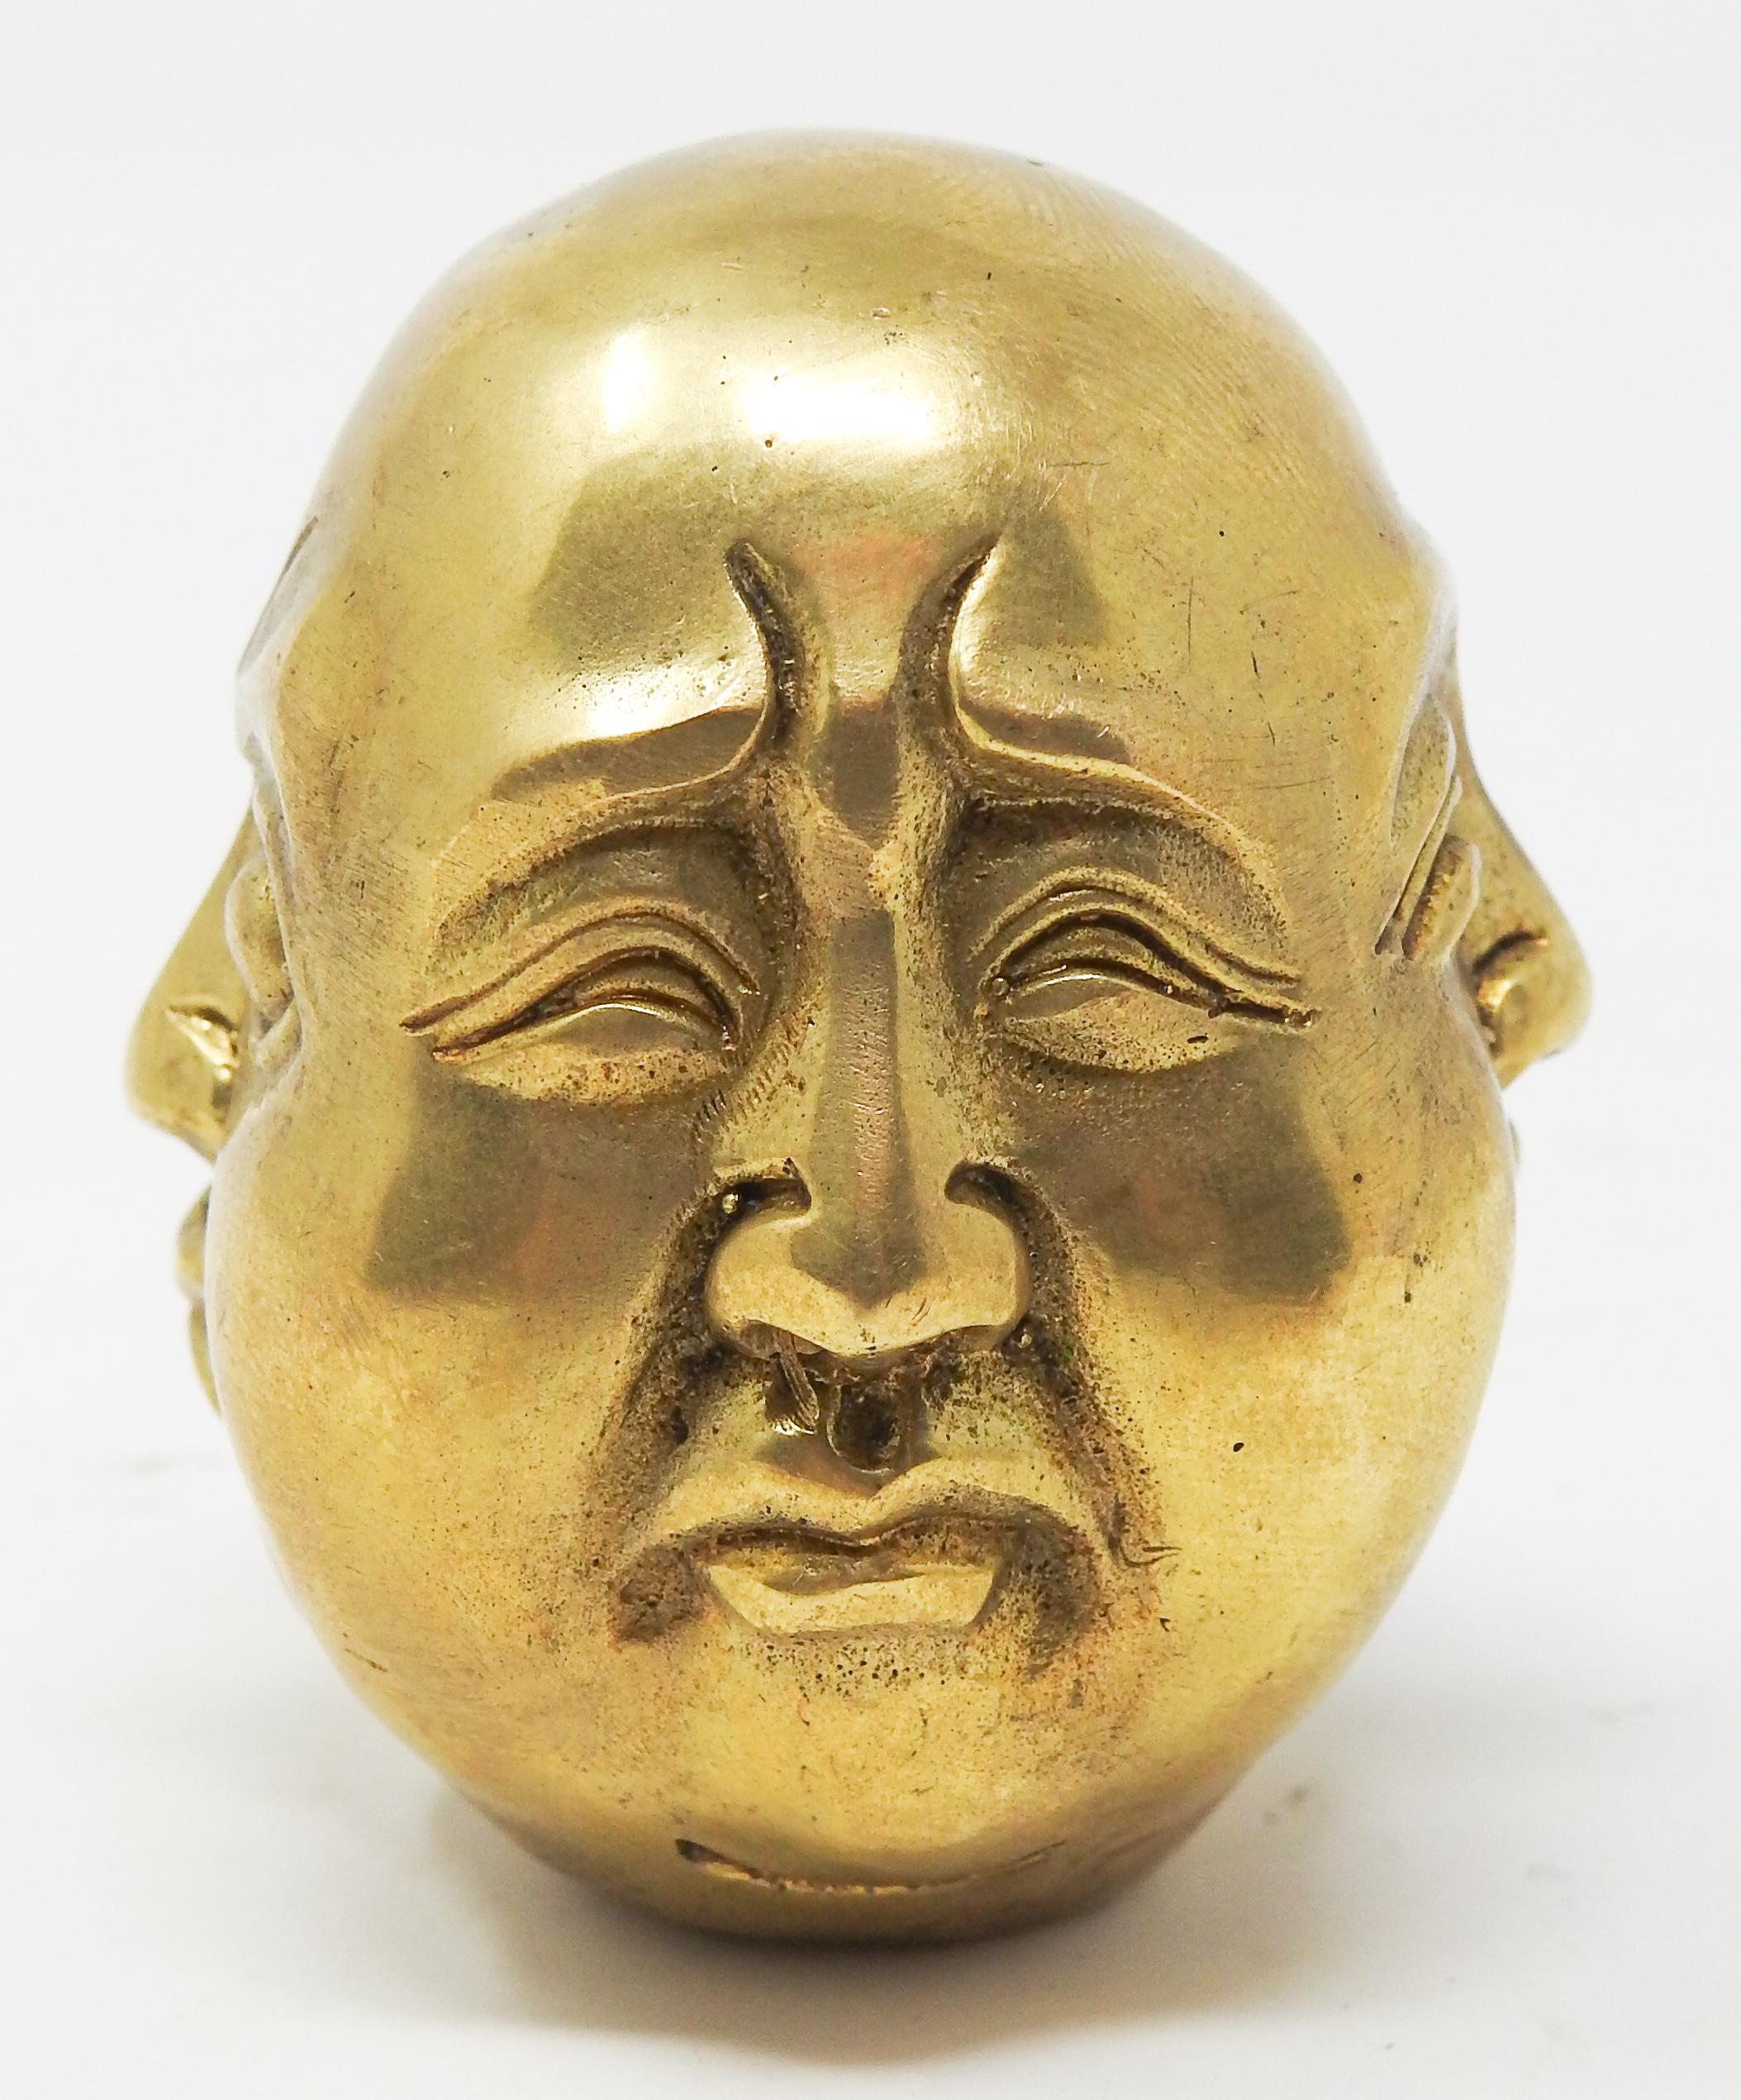 Offering this intriguing Chinese brass Buddha head chop seal. He has four different sides each depicting a different mood. He is done is solid brass. On the bottom there are four symbols which would be a signature of some sort and used to seal a